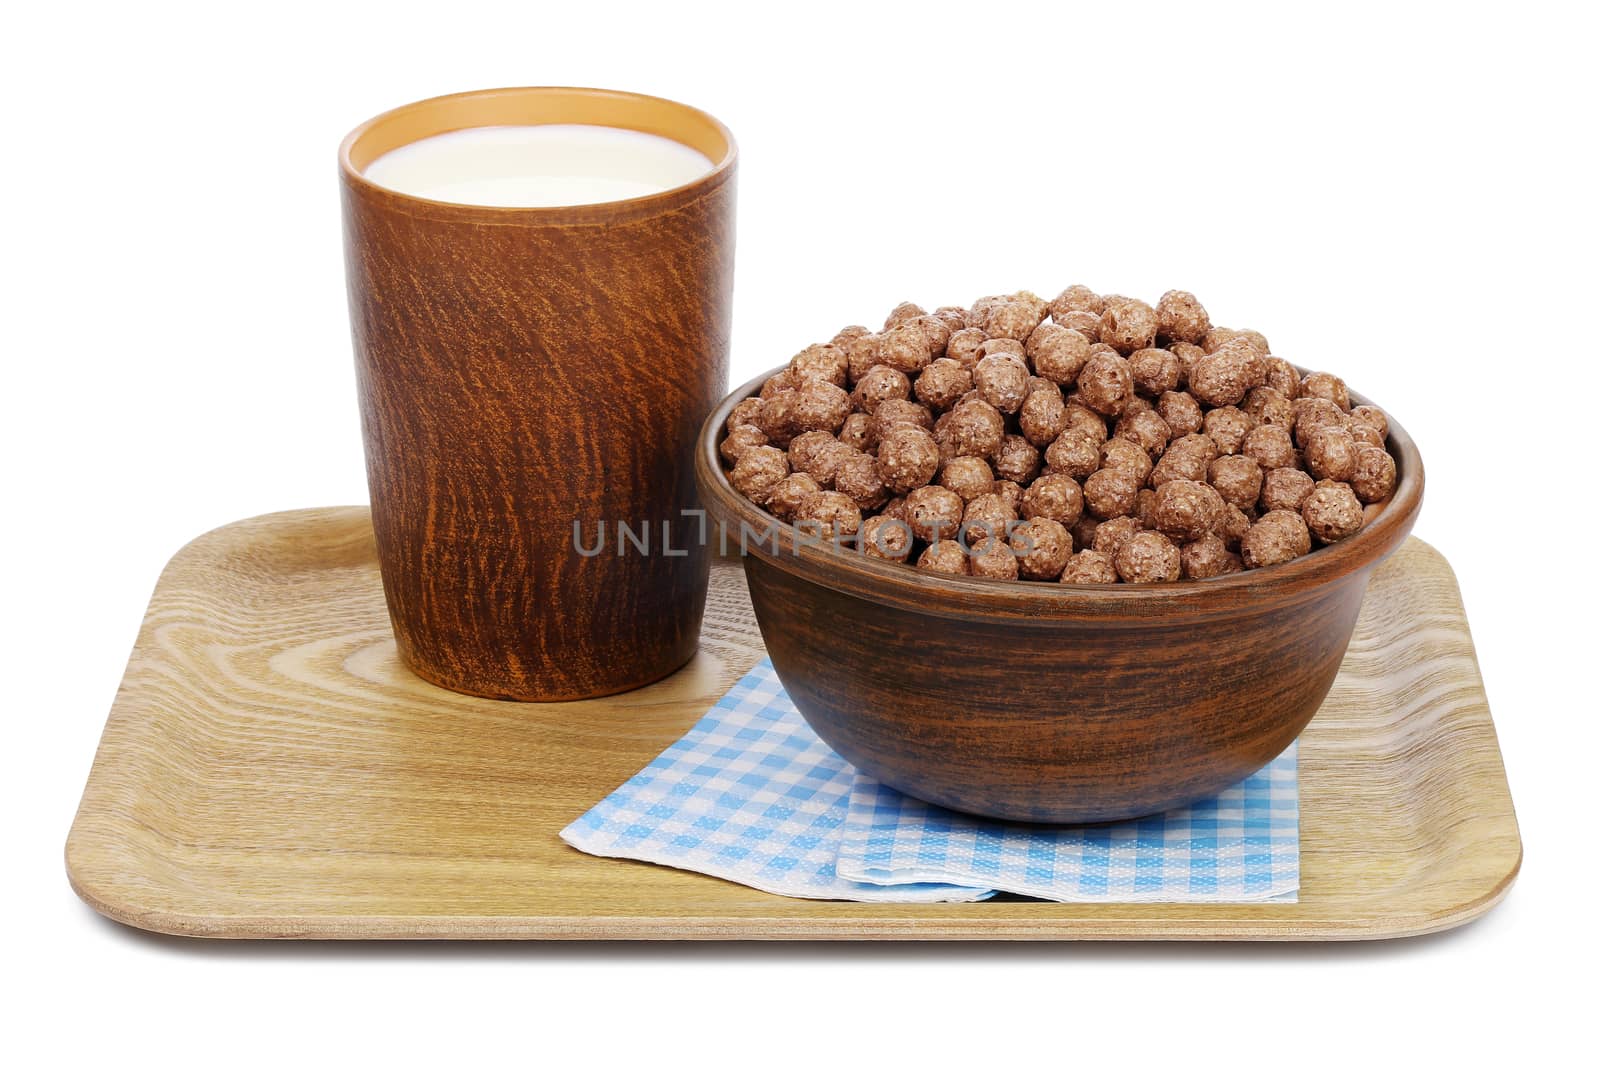 Chocolate cereal balls in a ceramic bowl and a mug with milk on a wooden tray with paper napkins, isolated on white background.